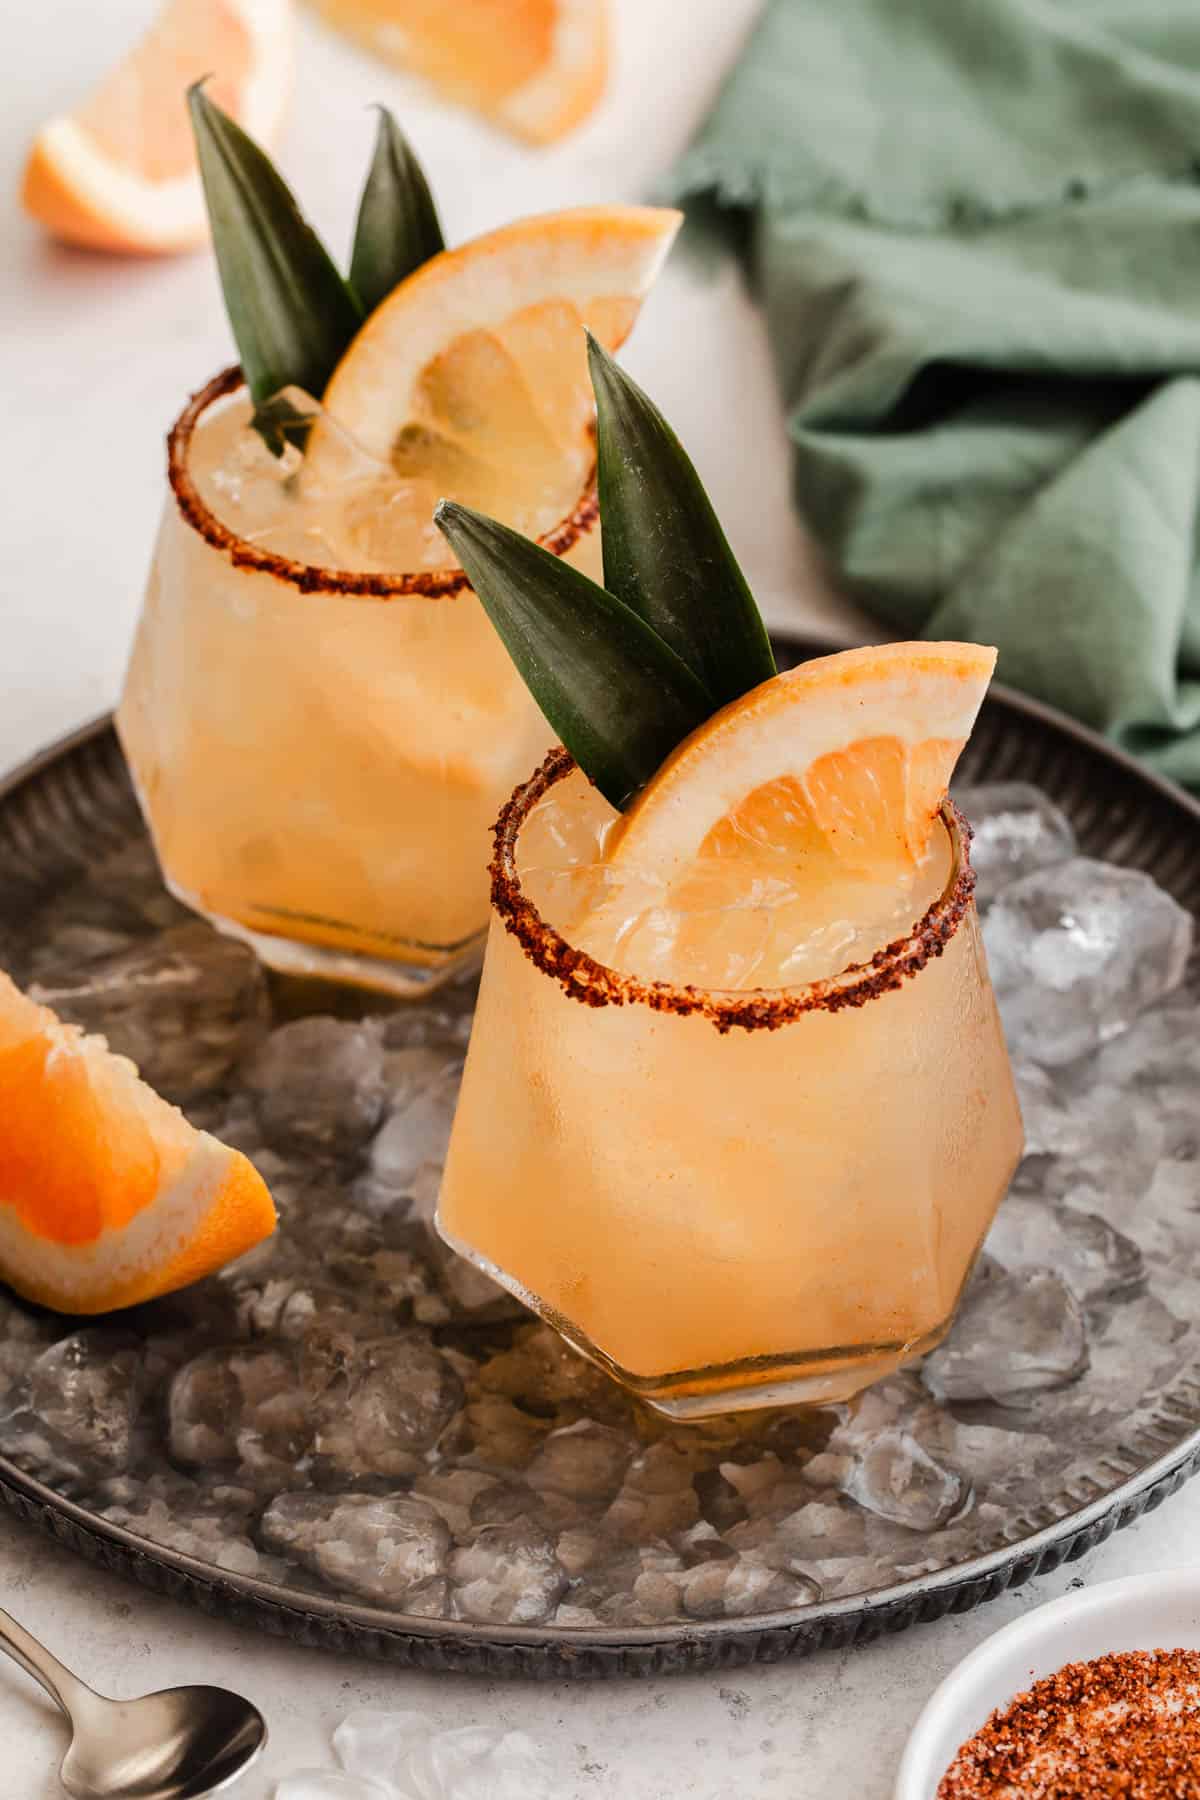 two glasses with peach colored drinks garnished with grapefruit slices and pineapple leaves, on gray tray.